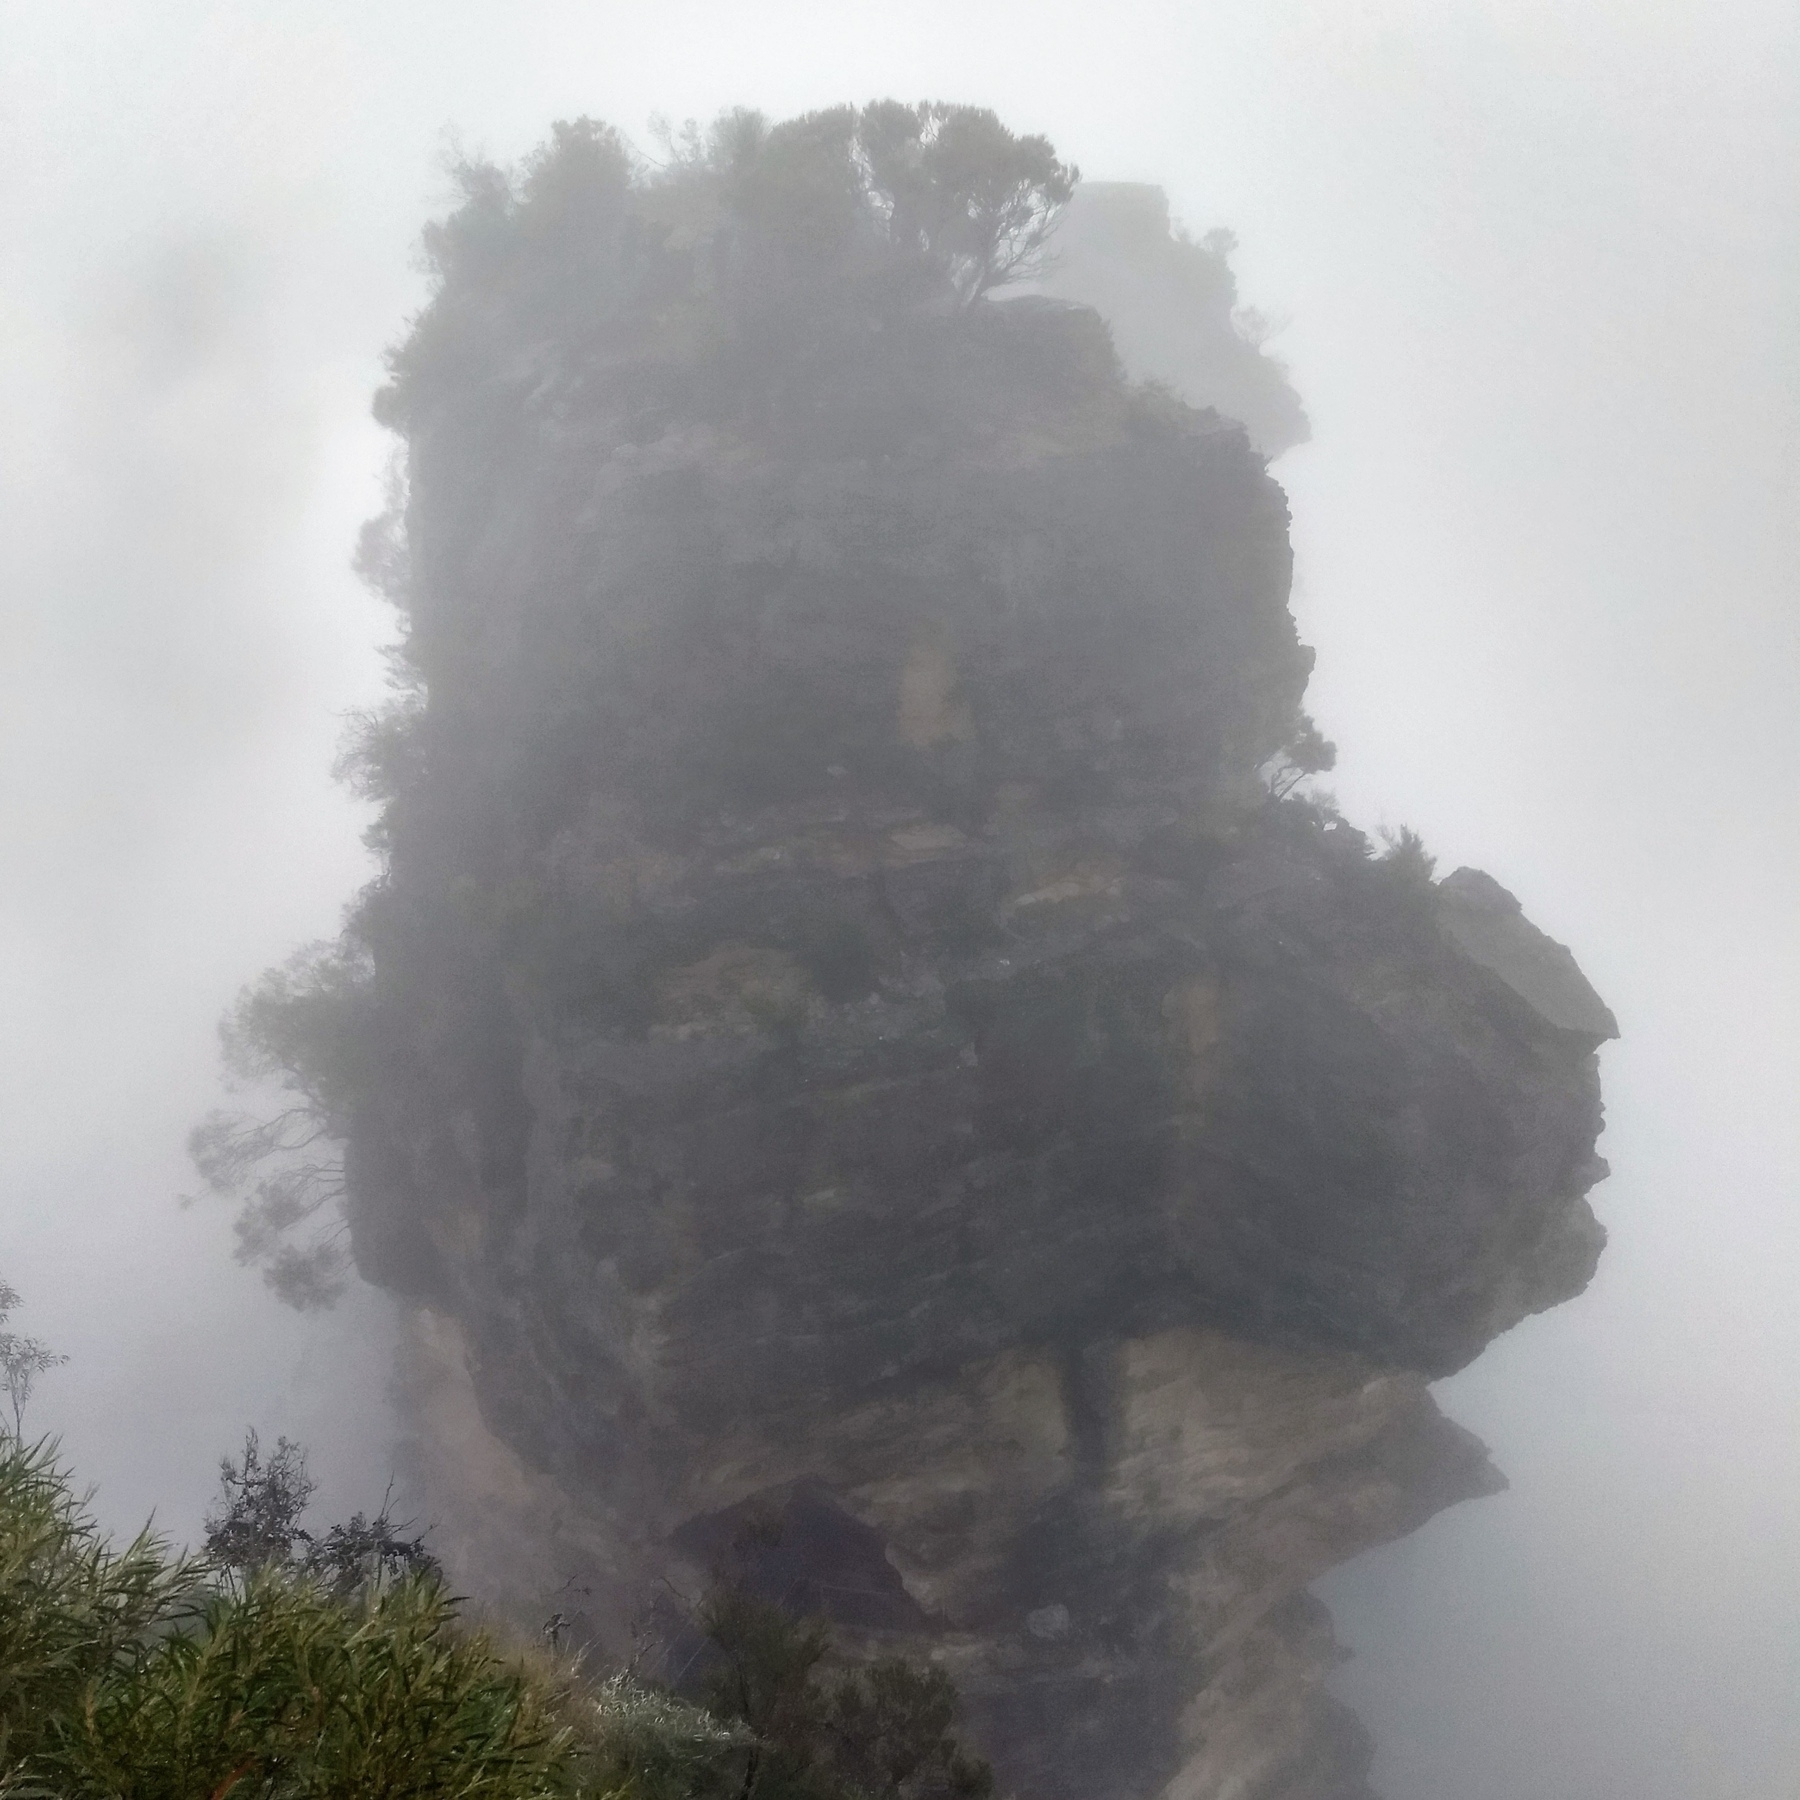 A mist-shrouded pillar of sandstone in the Blue Mountains, west of Sydney, topped with dense vegetation.